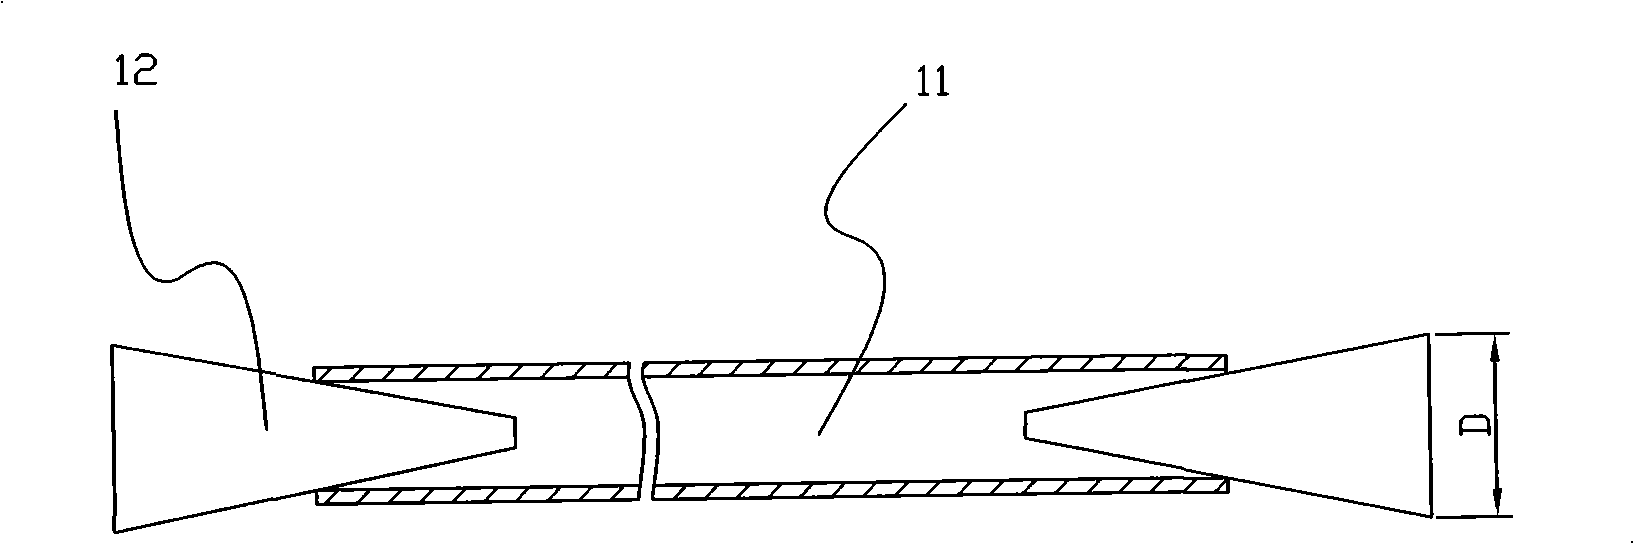 Anti-collision method for pipe body movement, transmission and collecting processes